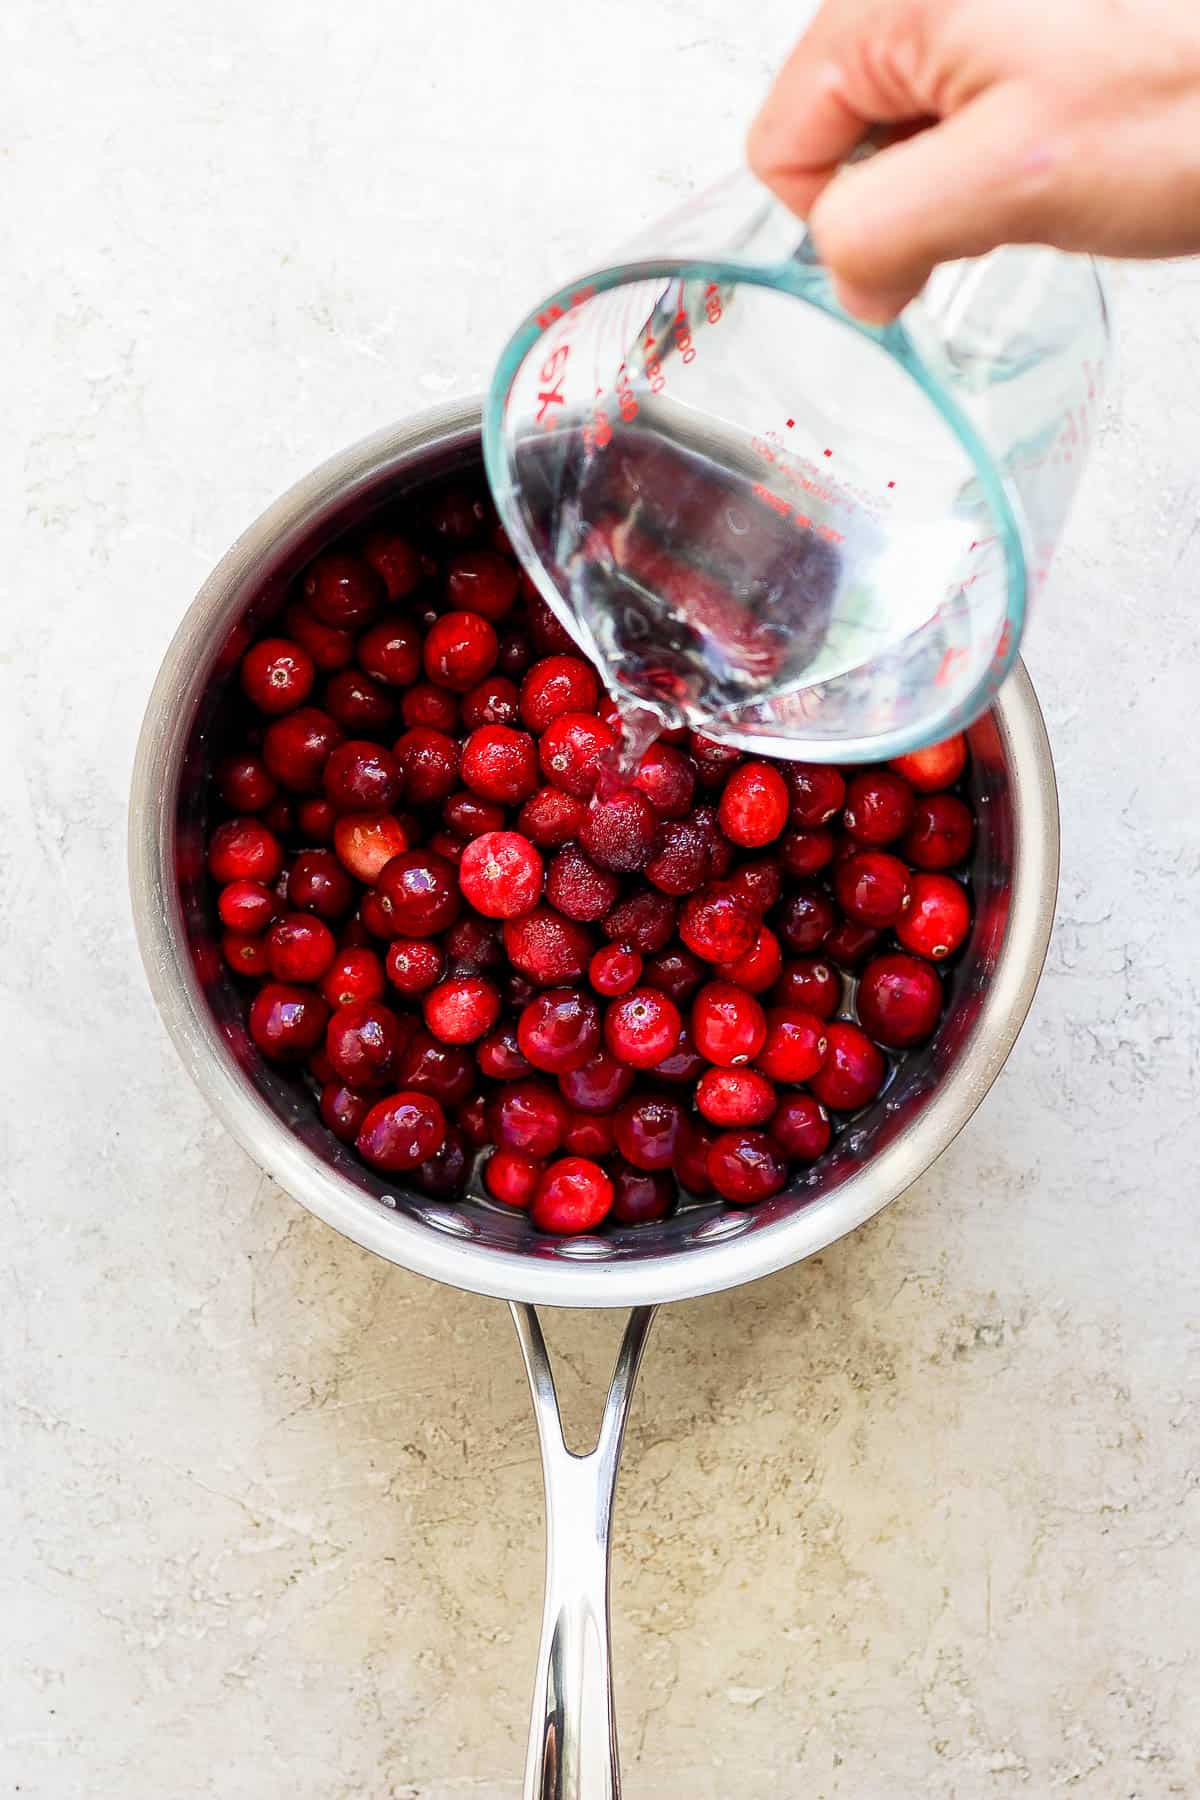 Water being poured into a sauce pan with cranberries.